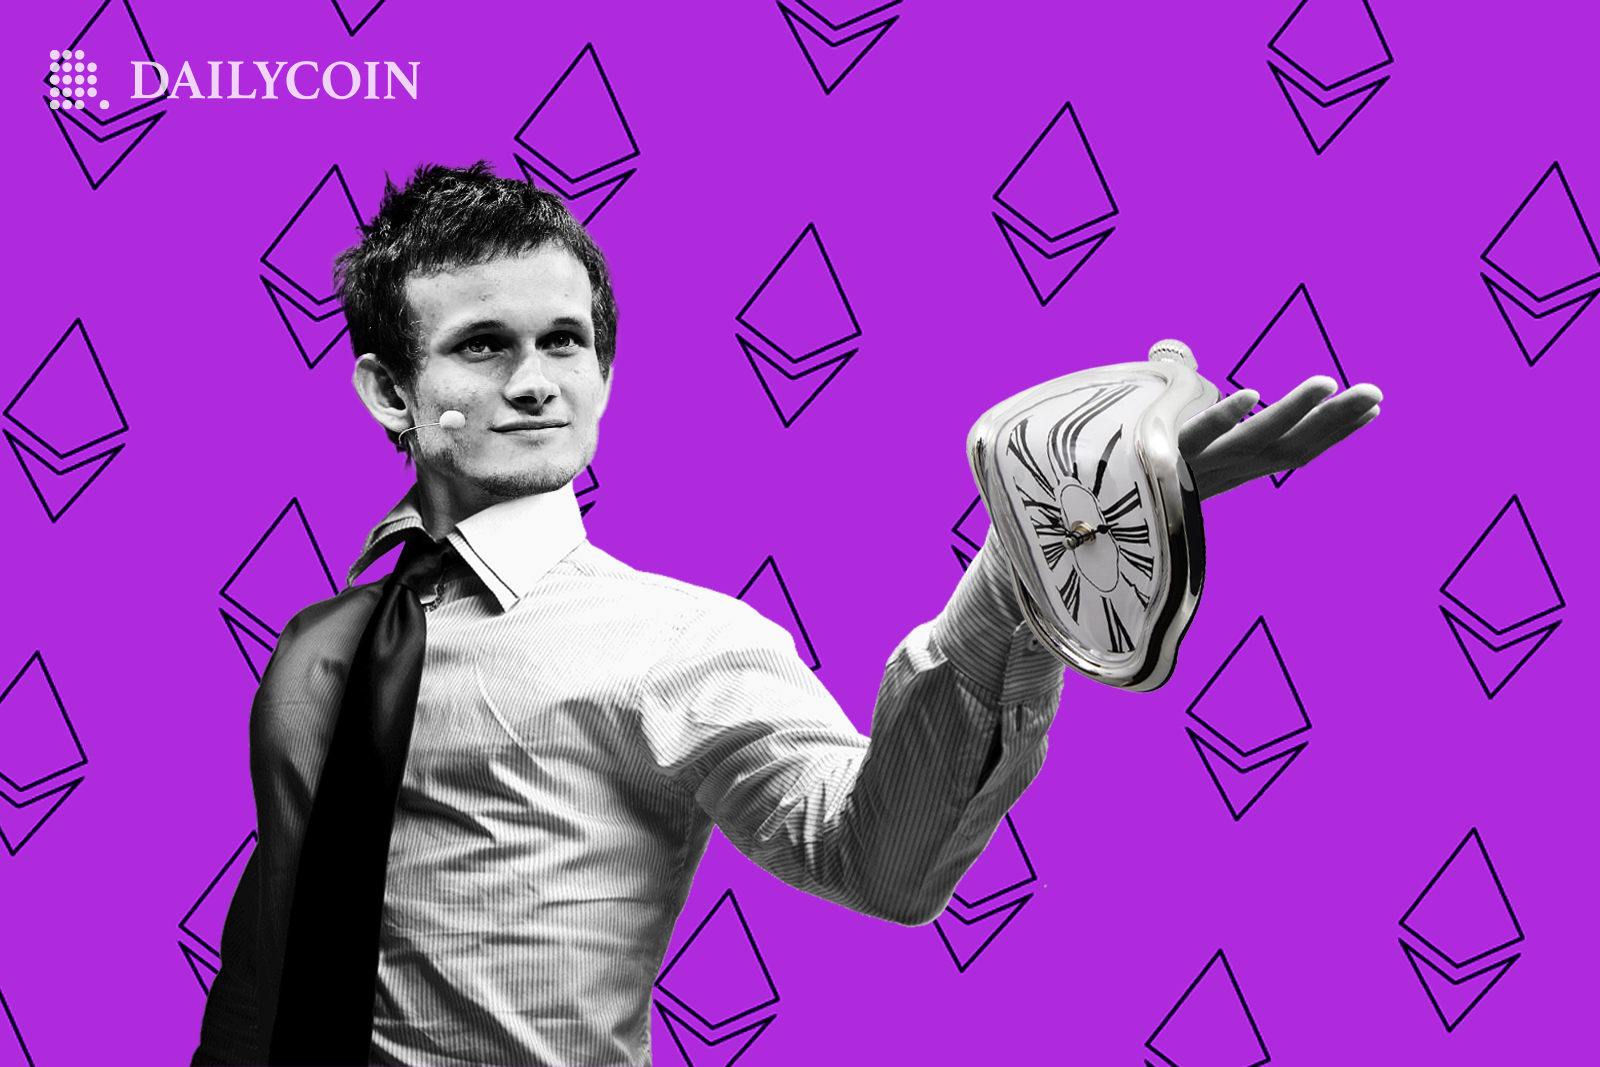 Buterin Speaks on Crypto Regulation, says he’s “Kinda Happy” EFTs are Getting Delayed